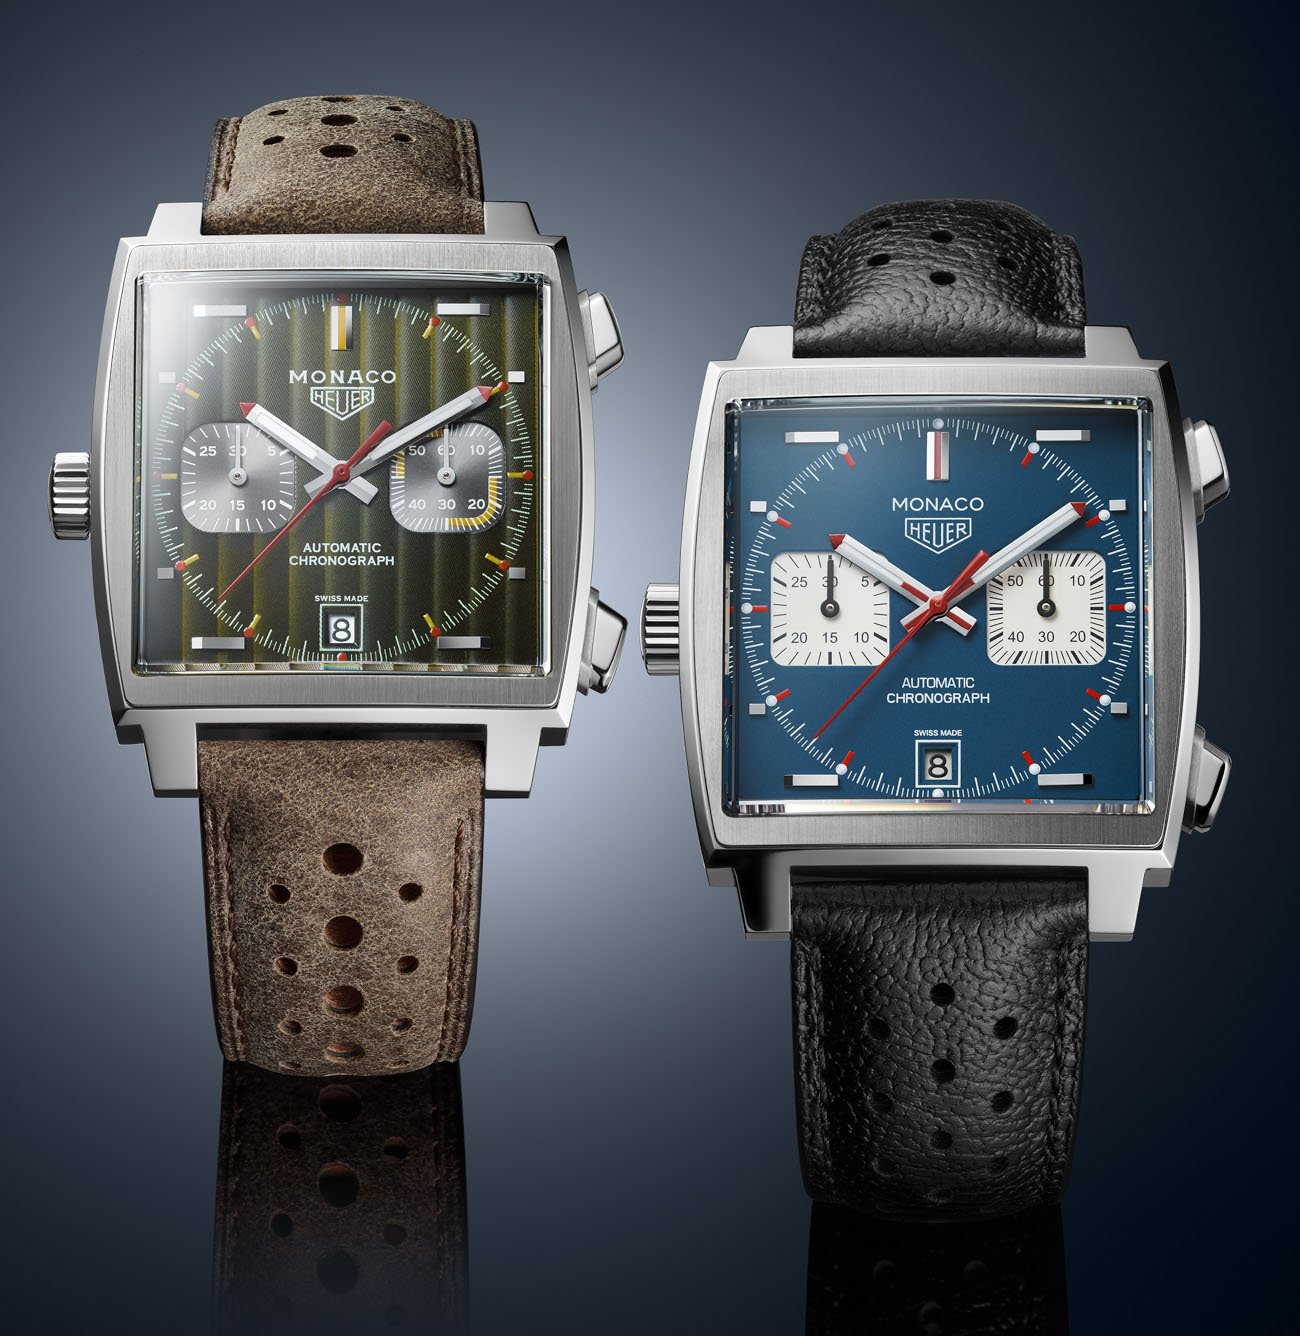 TAG Heuer Monaco 1969-1979 Limited-Edition Watch Debut Watch Releases 